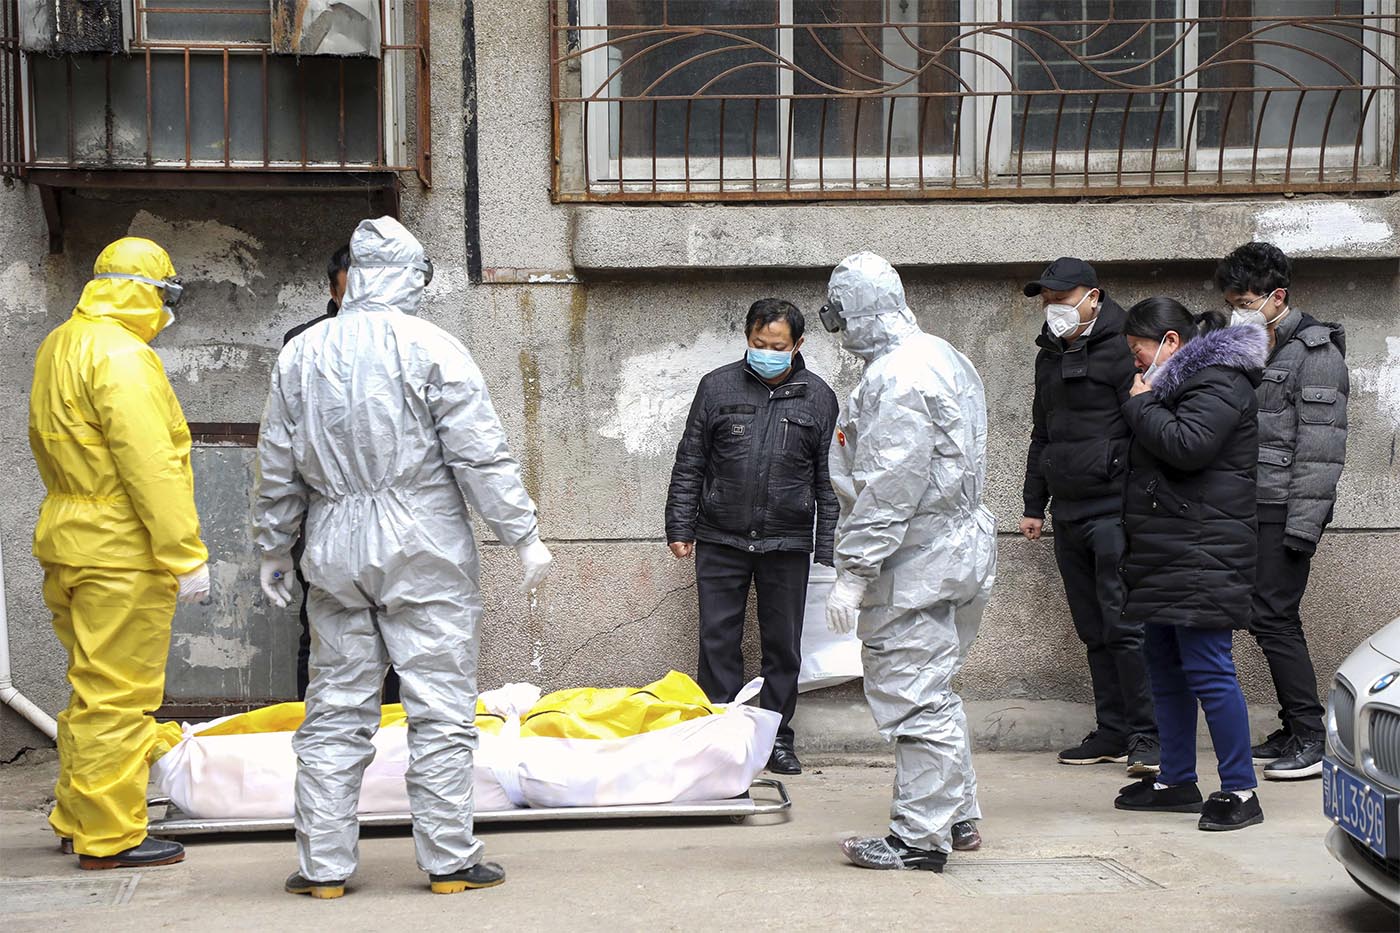 Funeral home workers remove the body of a person suspect to have died from a virus outbreak from a residential building in Wuhan 